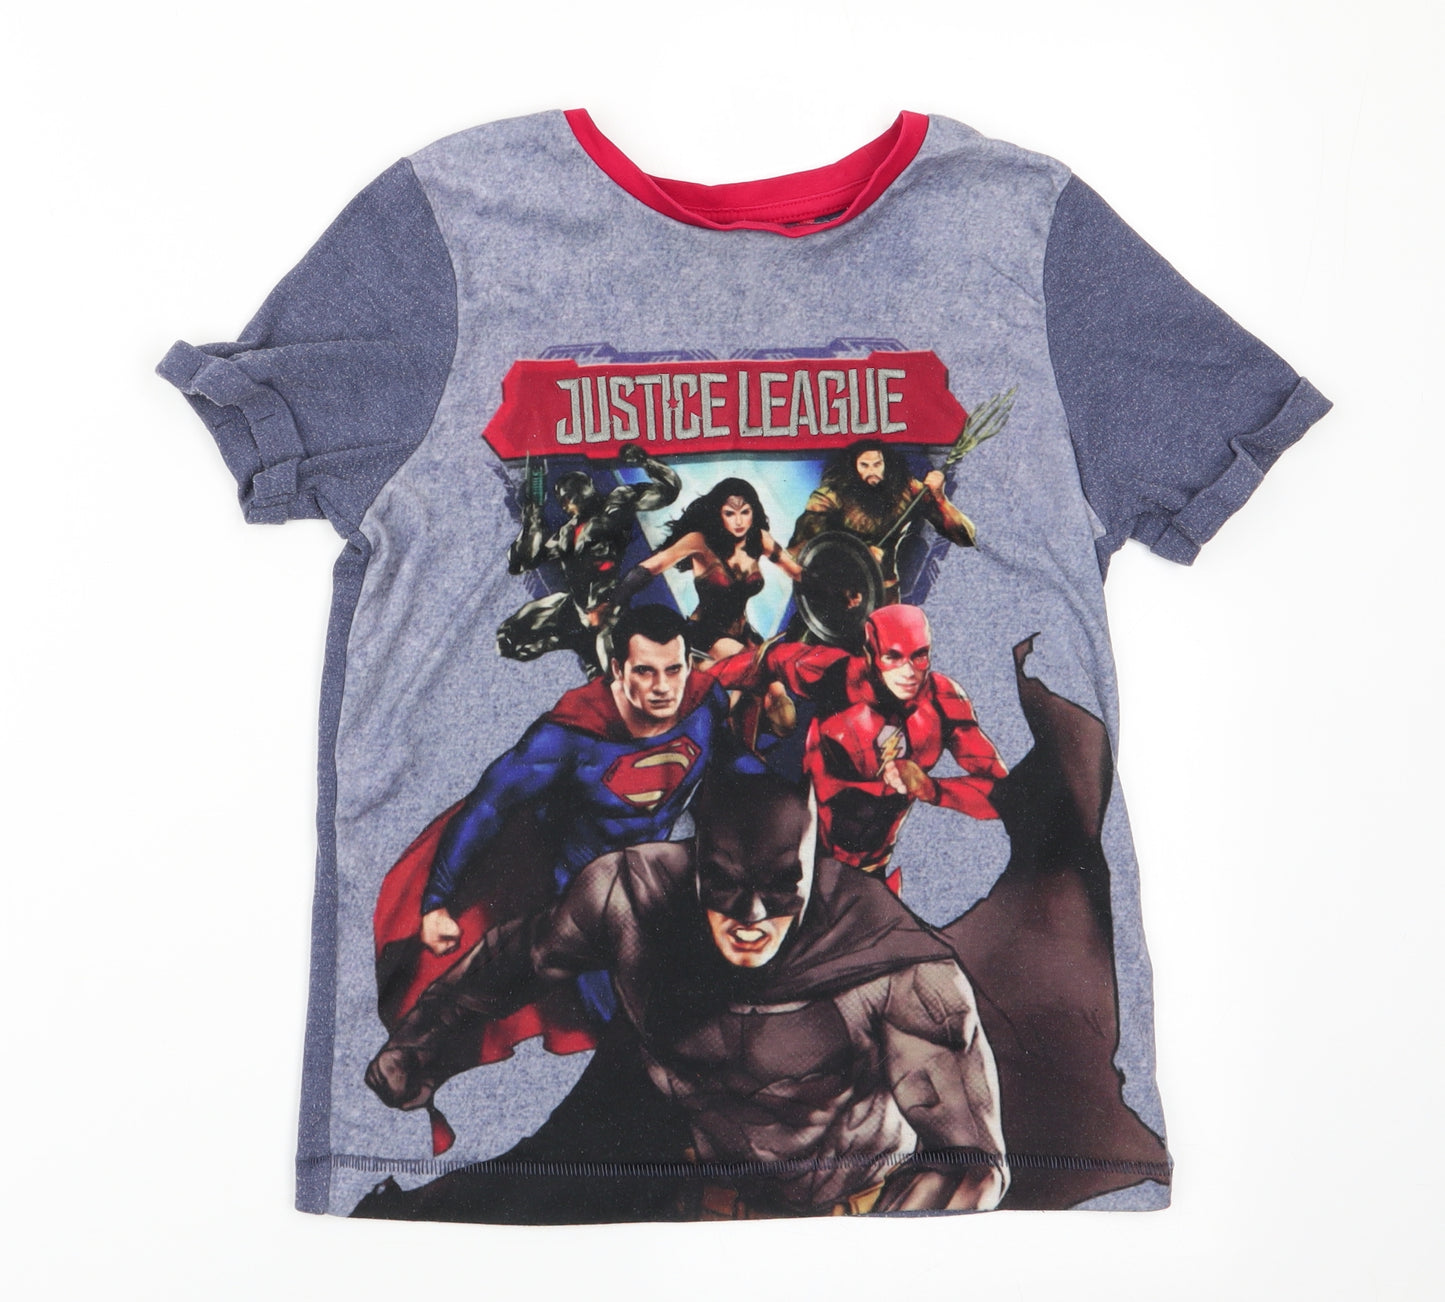 Justice League Boys Blue Solid   Pyjama Top Size 8-9 Years  - Super Heroes